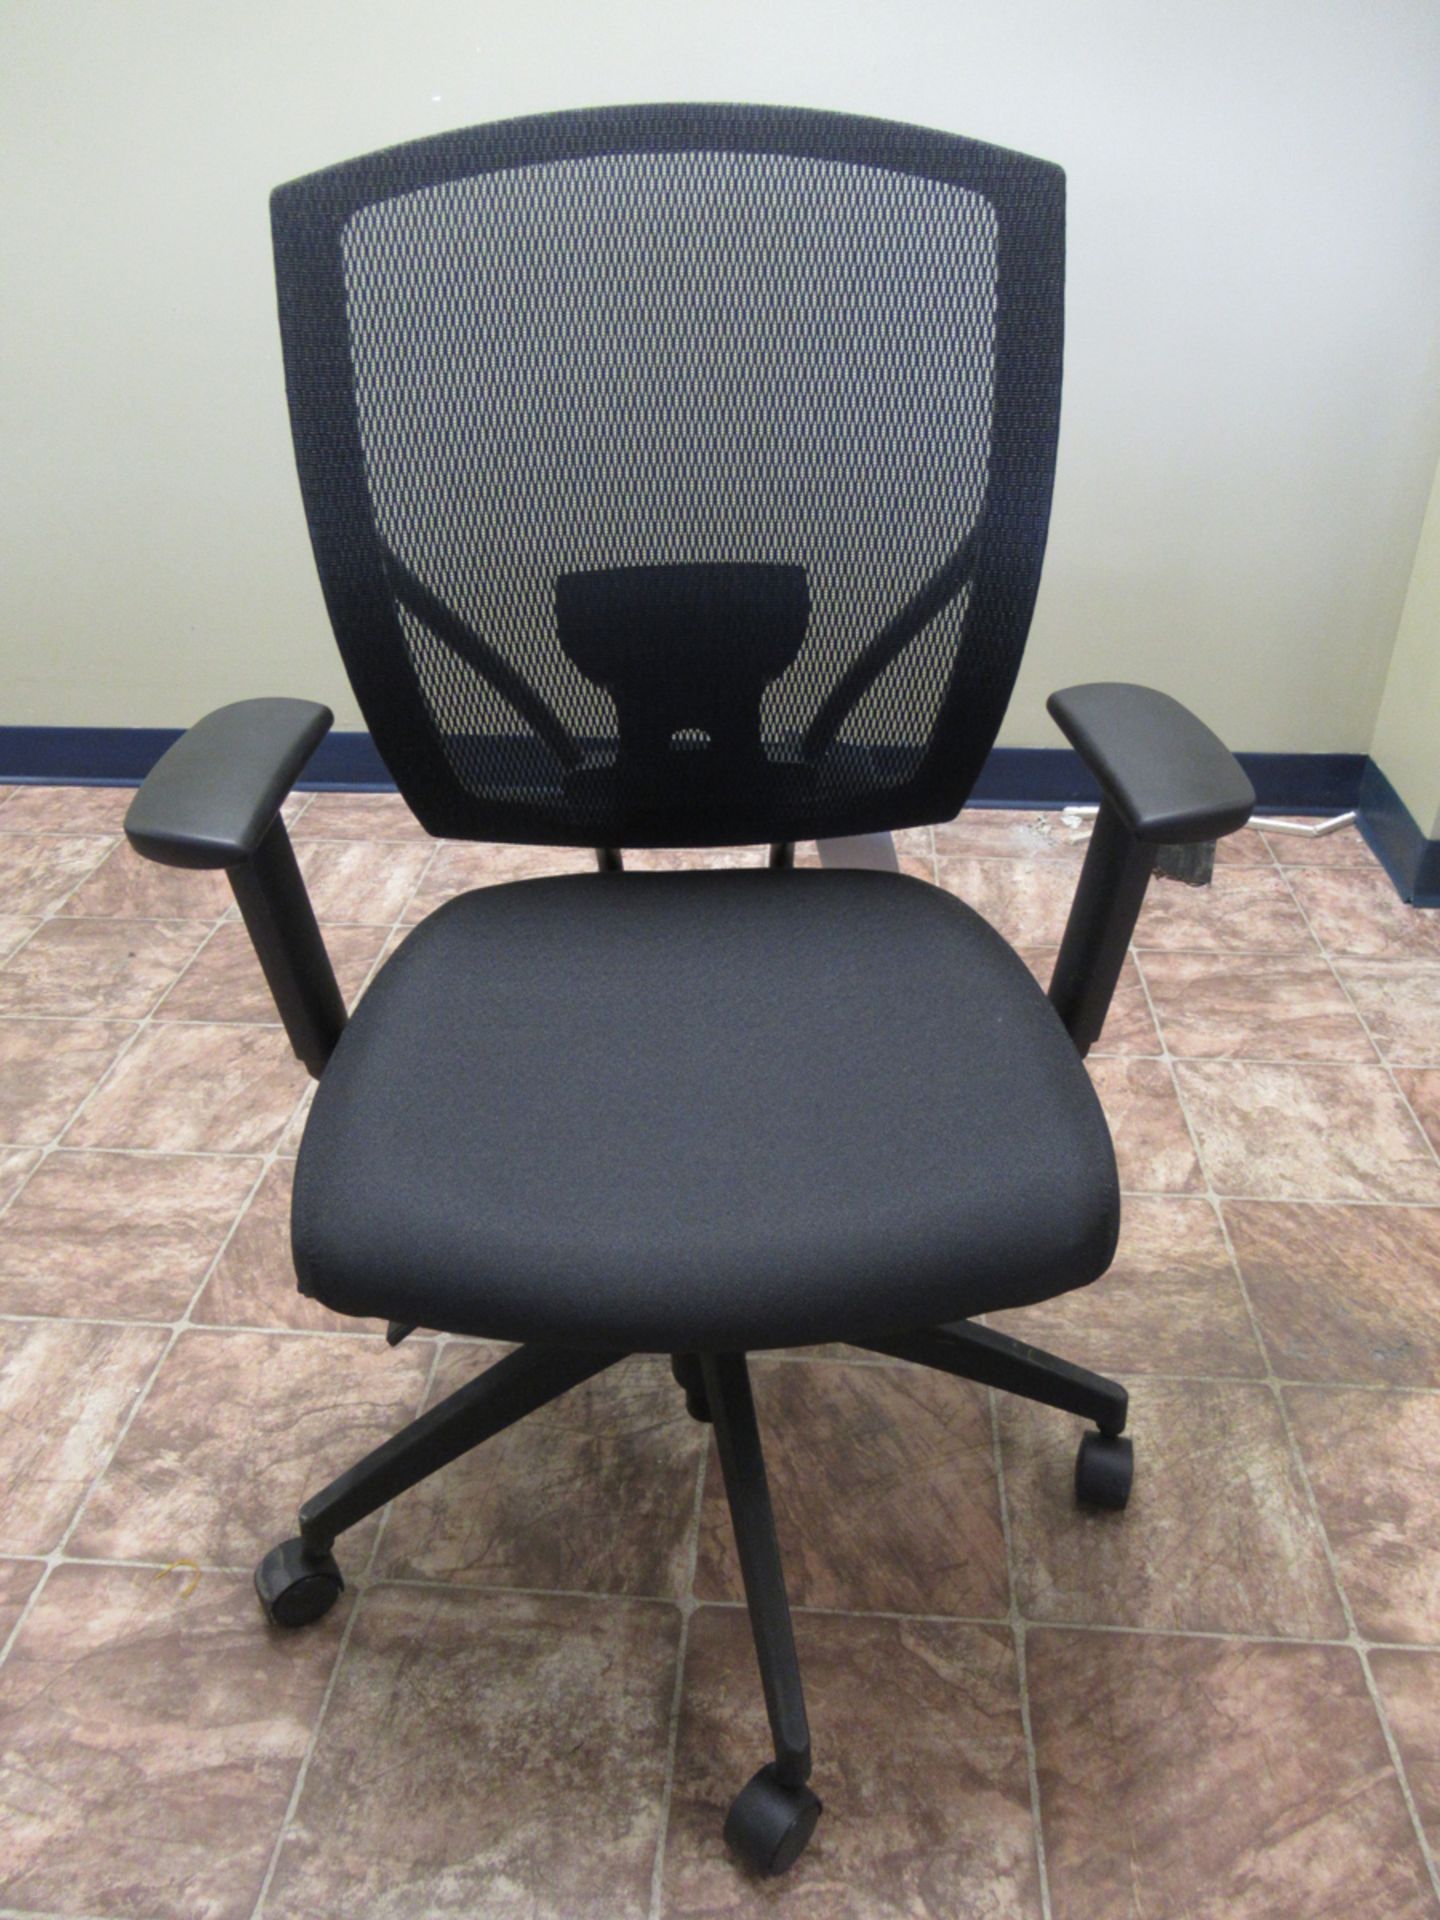 MESH OFFICE CHAIR (NEW)